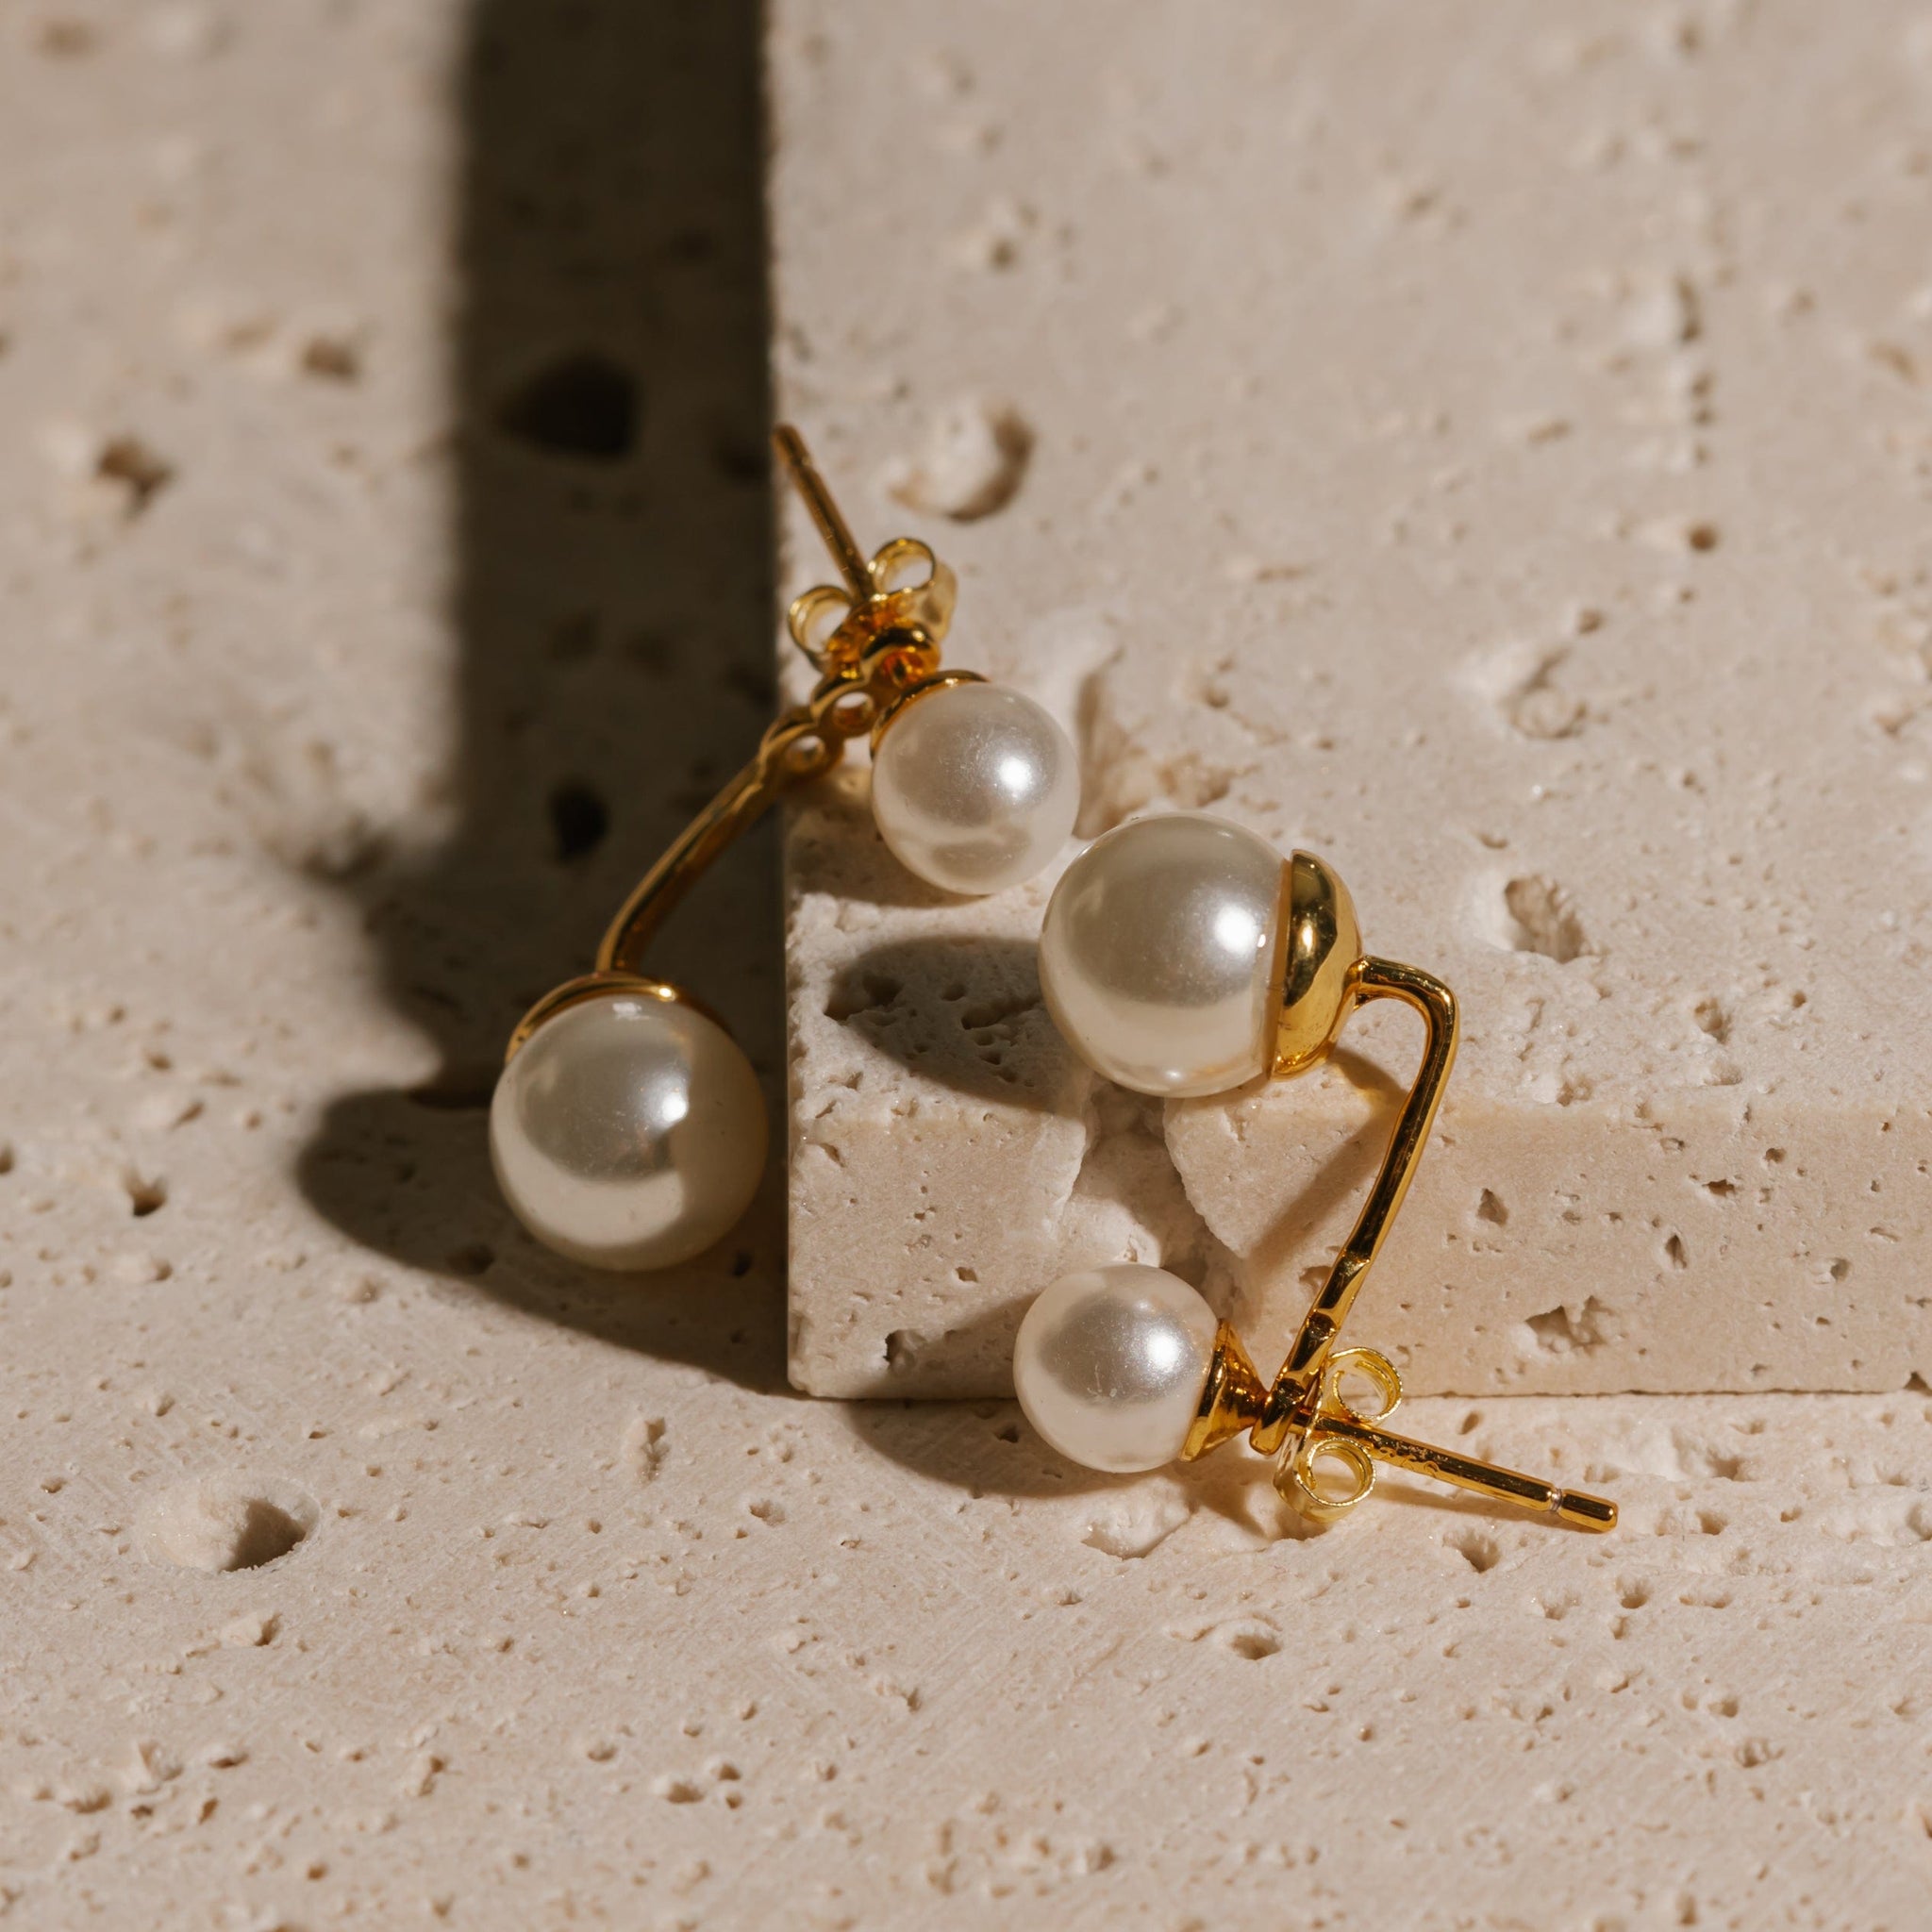 A pair of Perla Ear Jackets lays propped up on a stone countertop, the pearls glistening under the light.